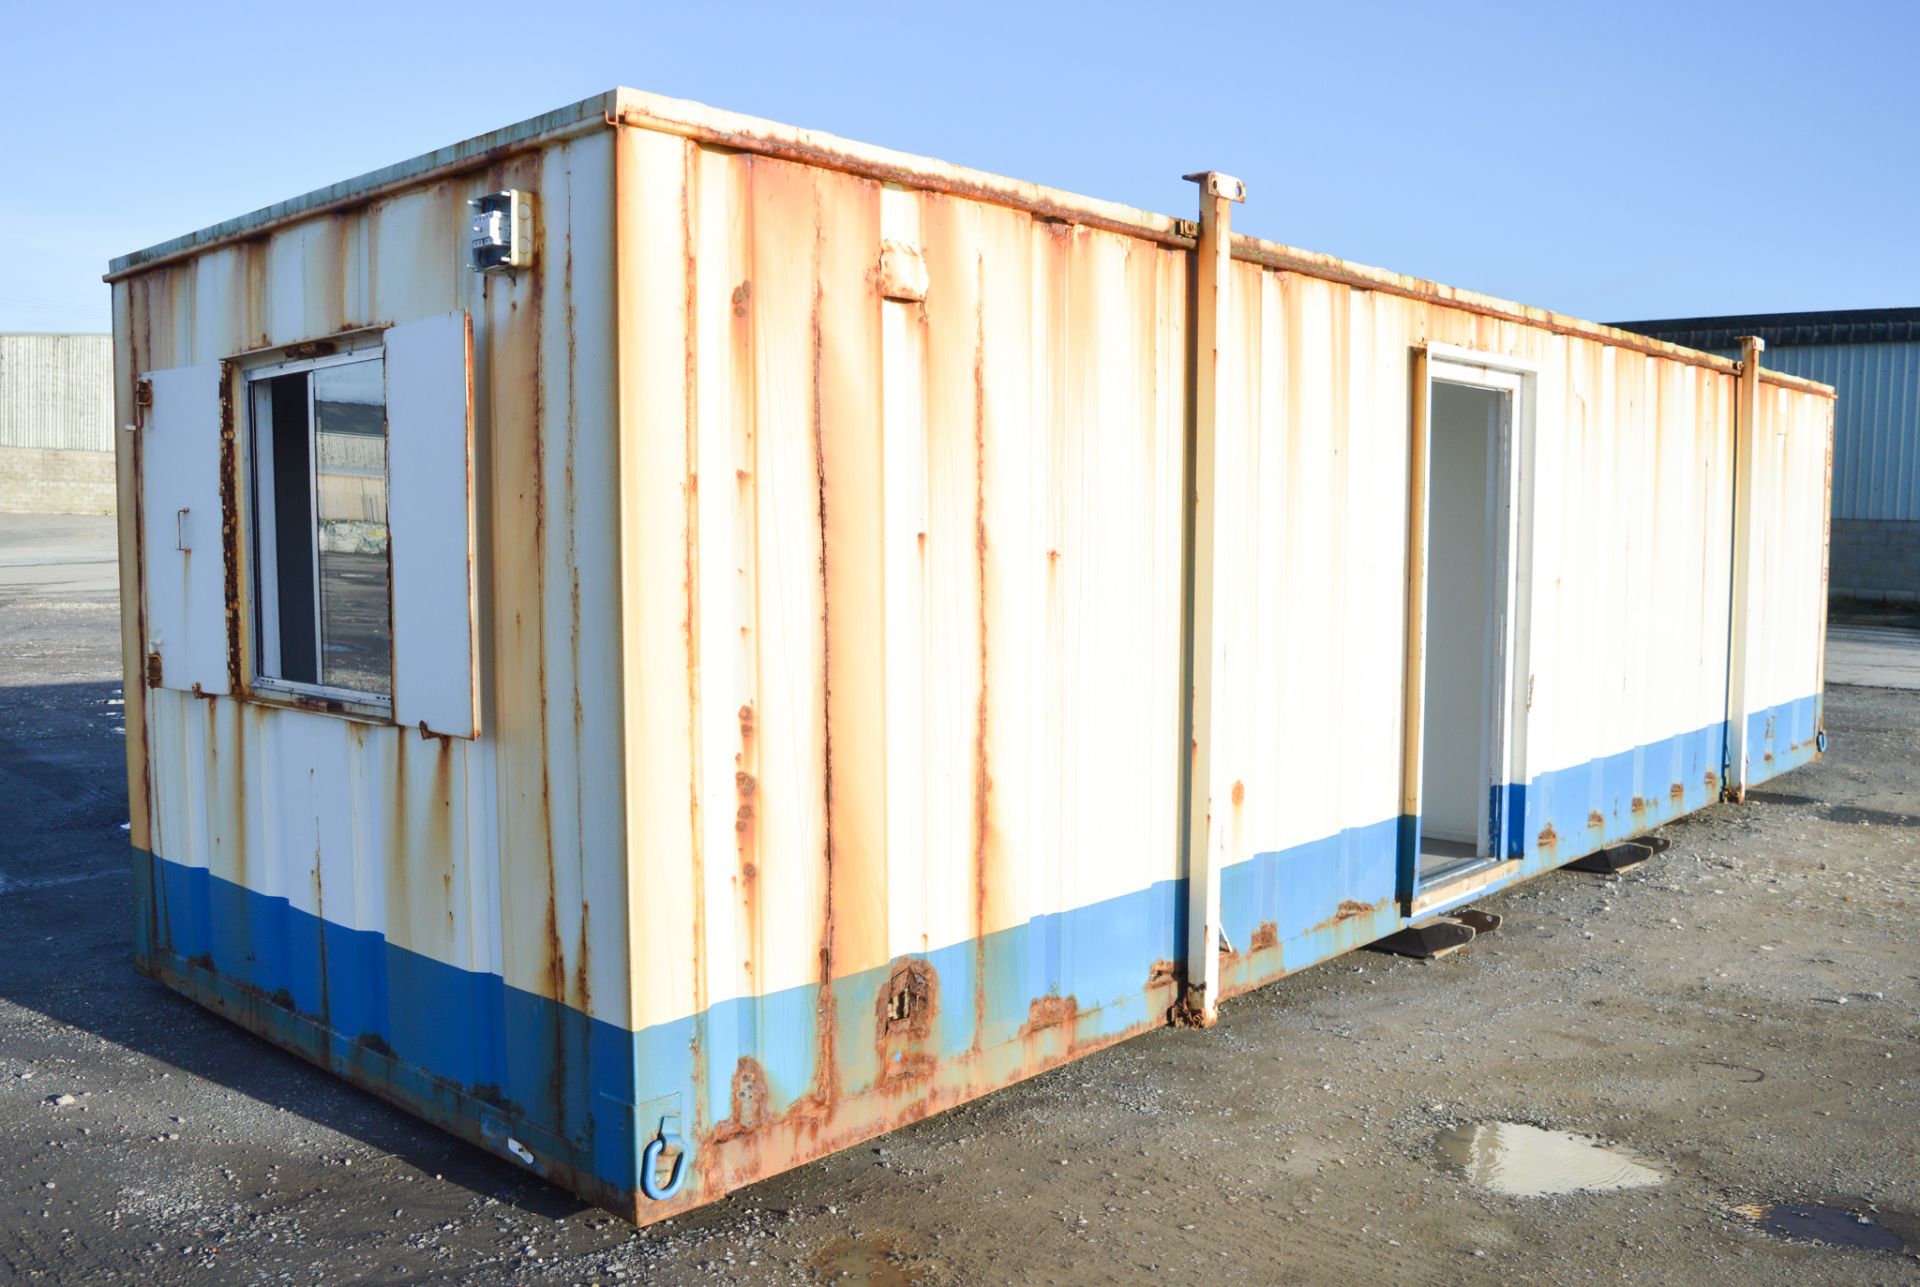 32 ft x 10 ft steel anti-vandal jack leg site office unit comprising of 2 offices BBA1379